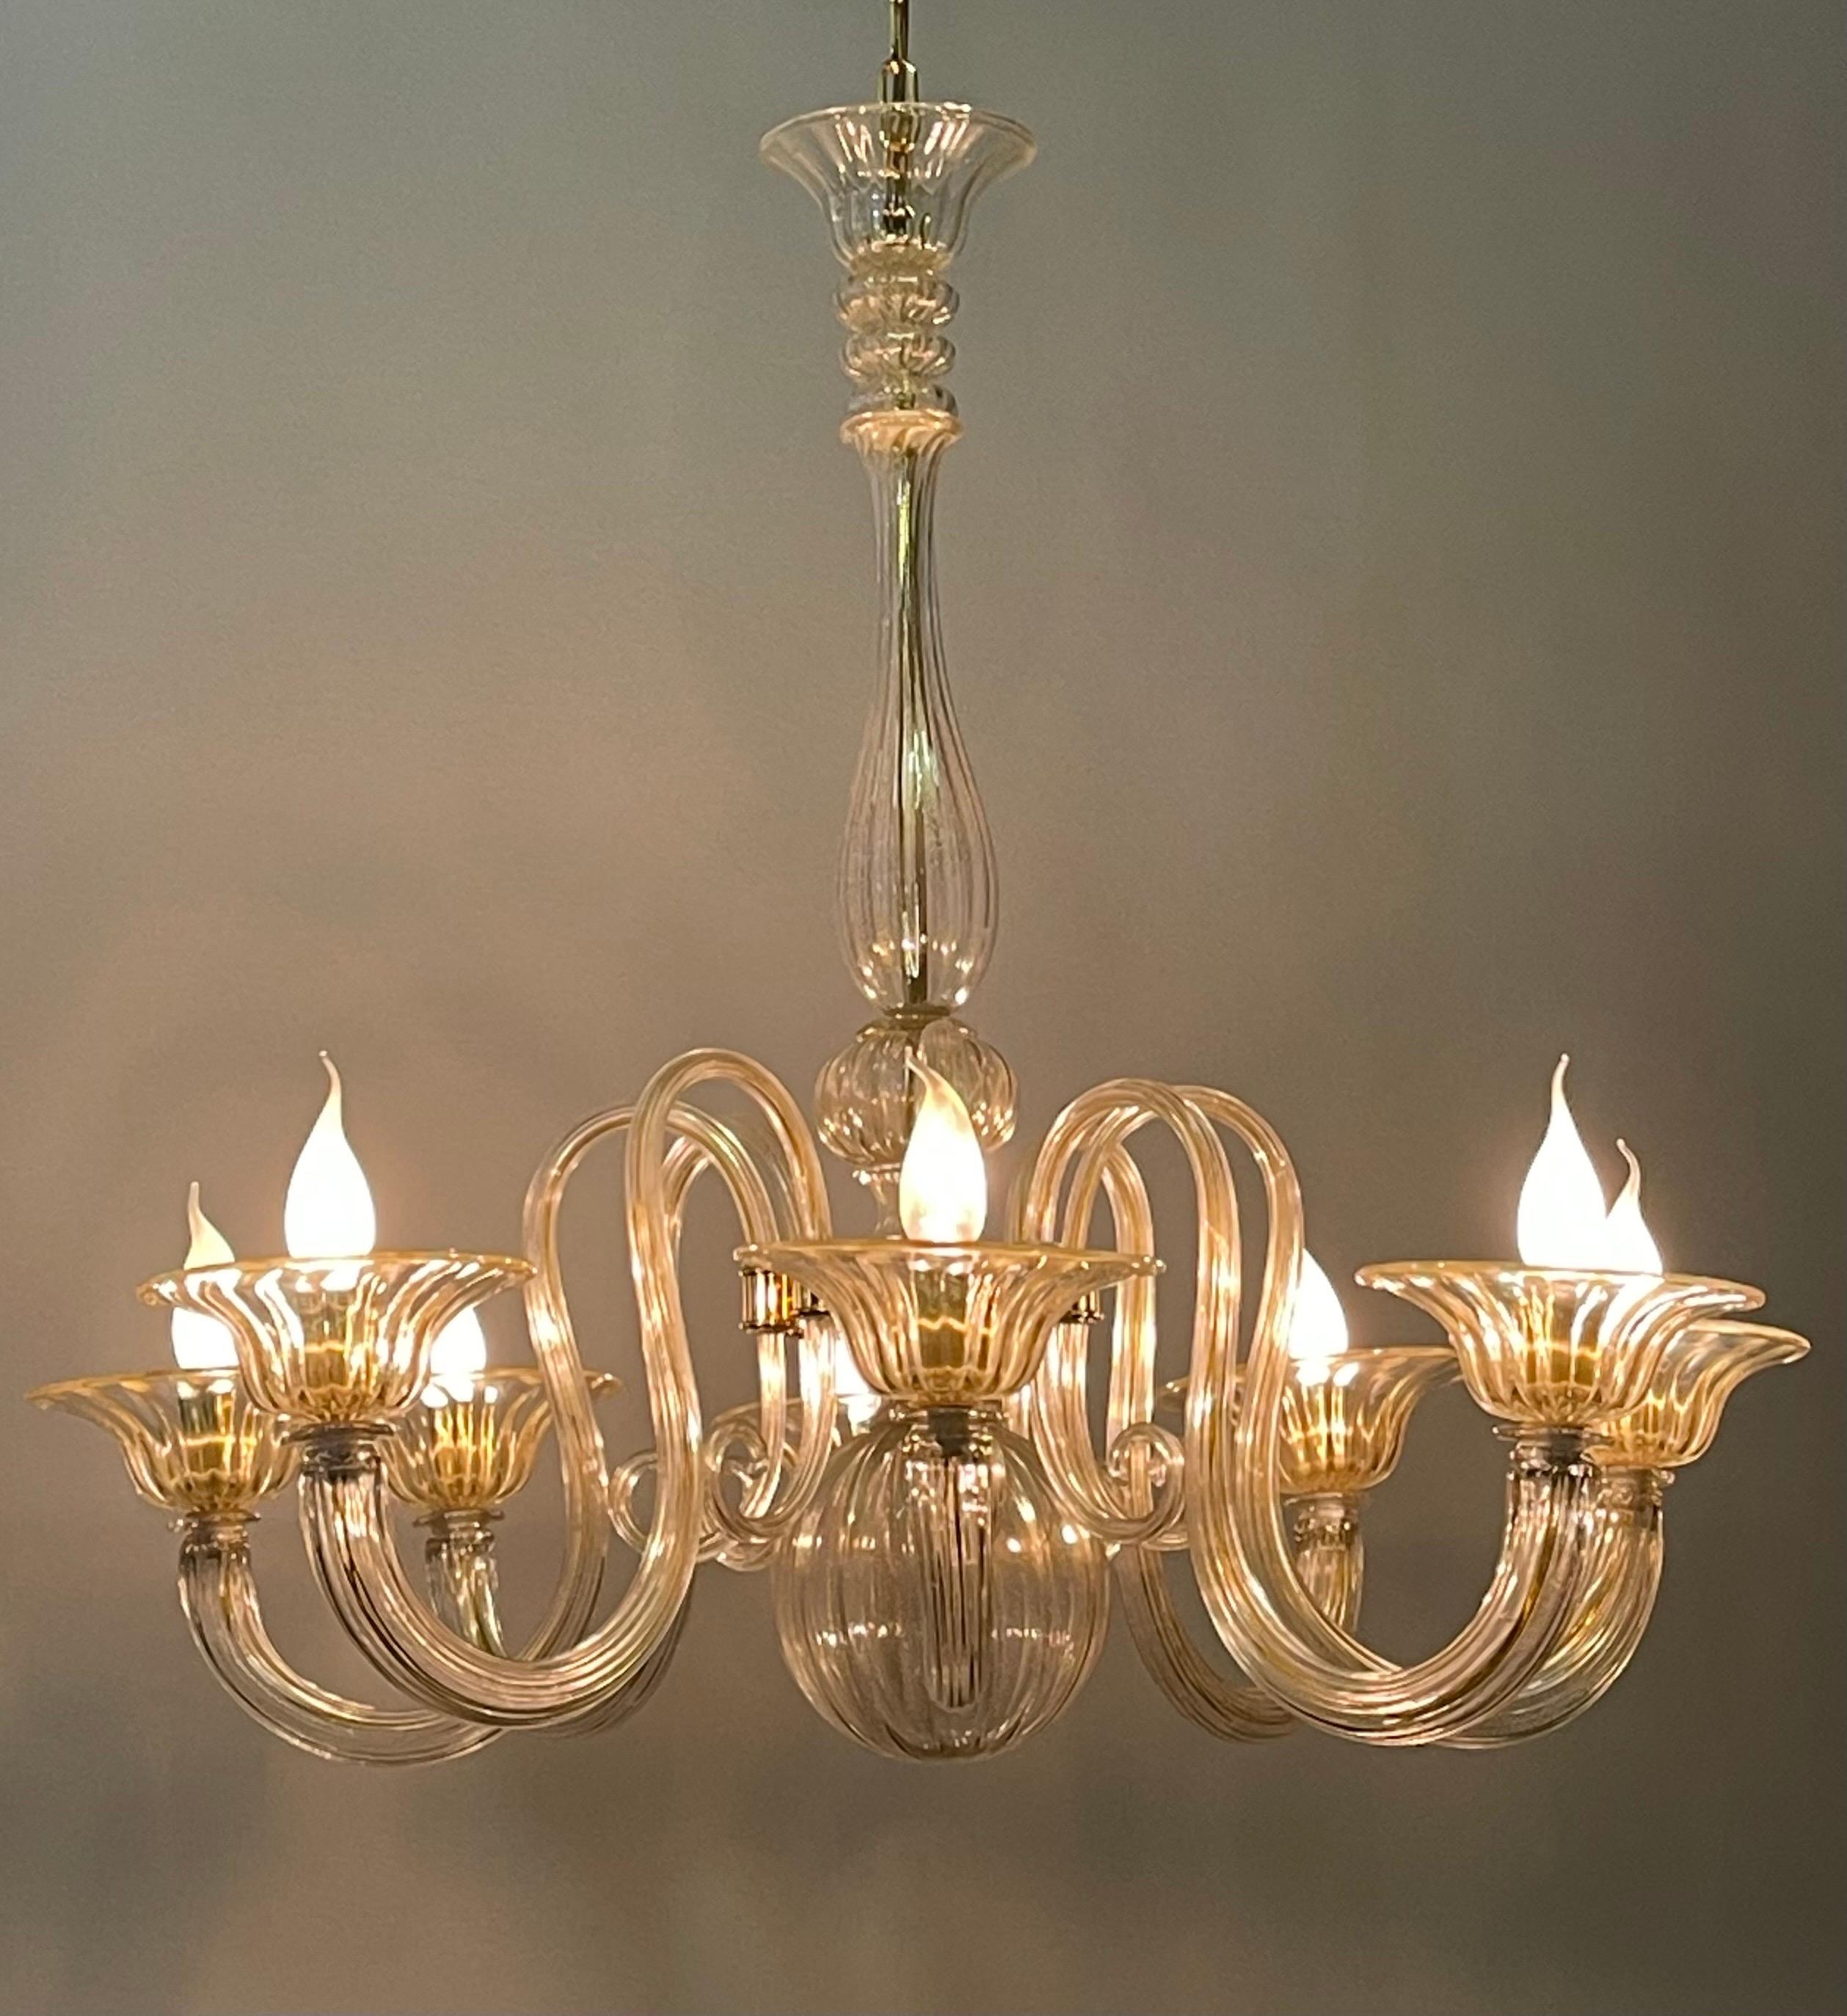 Large Barovier Toso Gold Dusted Murano Glass Chandelier, circa 1960s For Sale 6